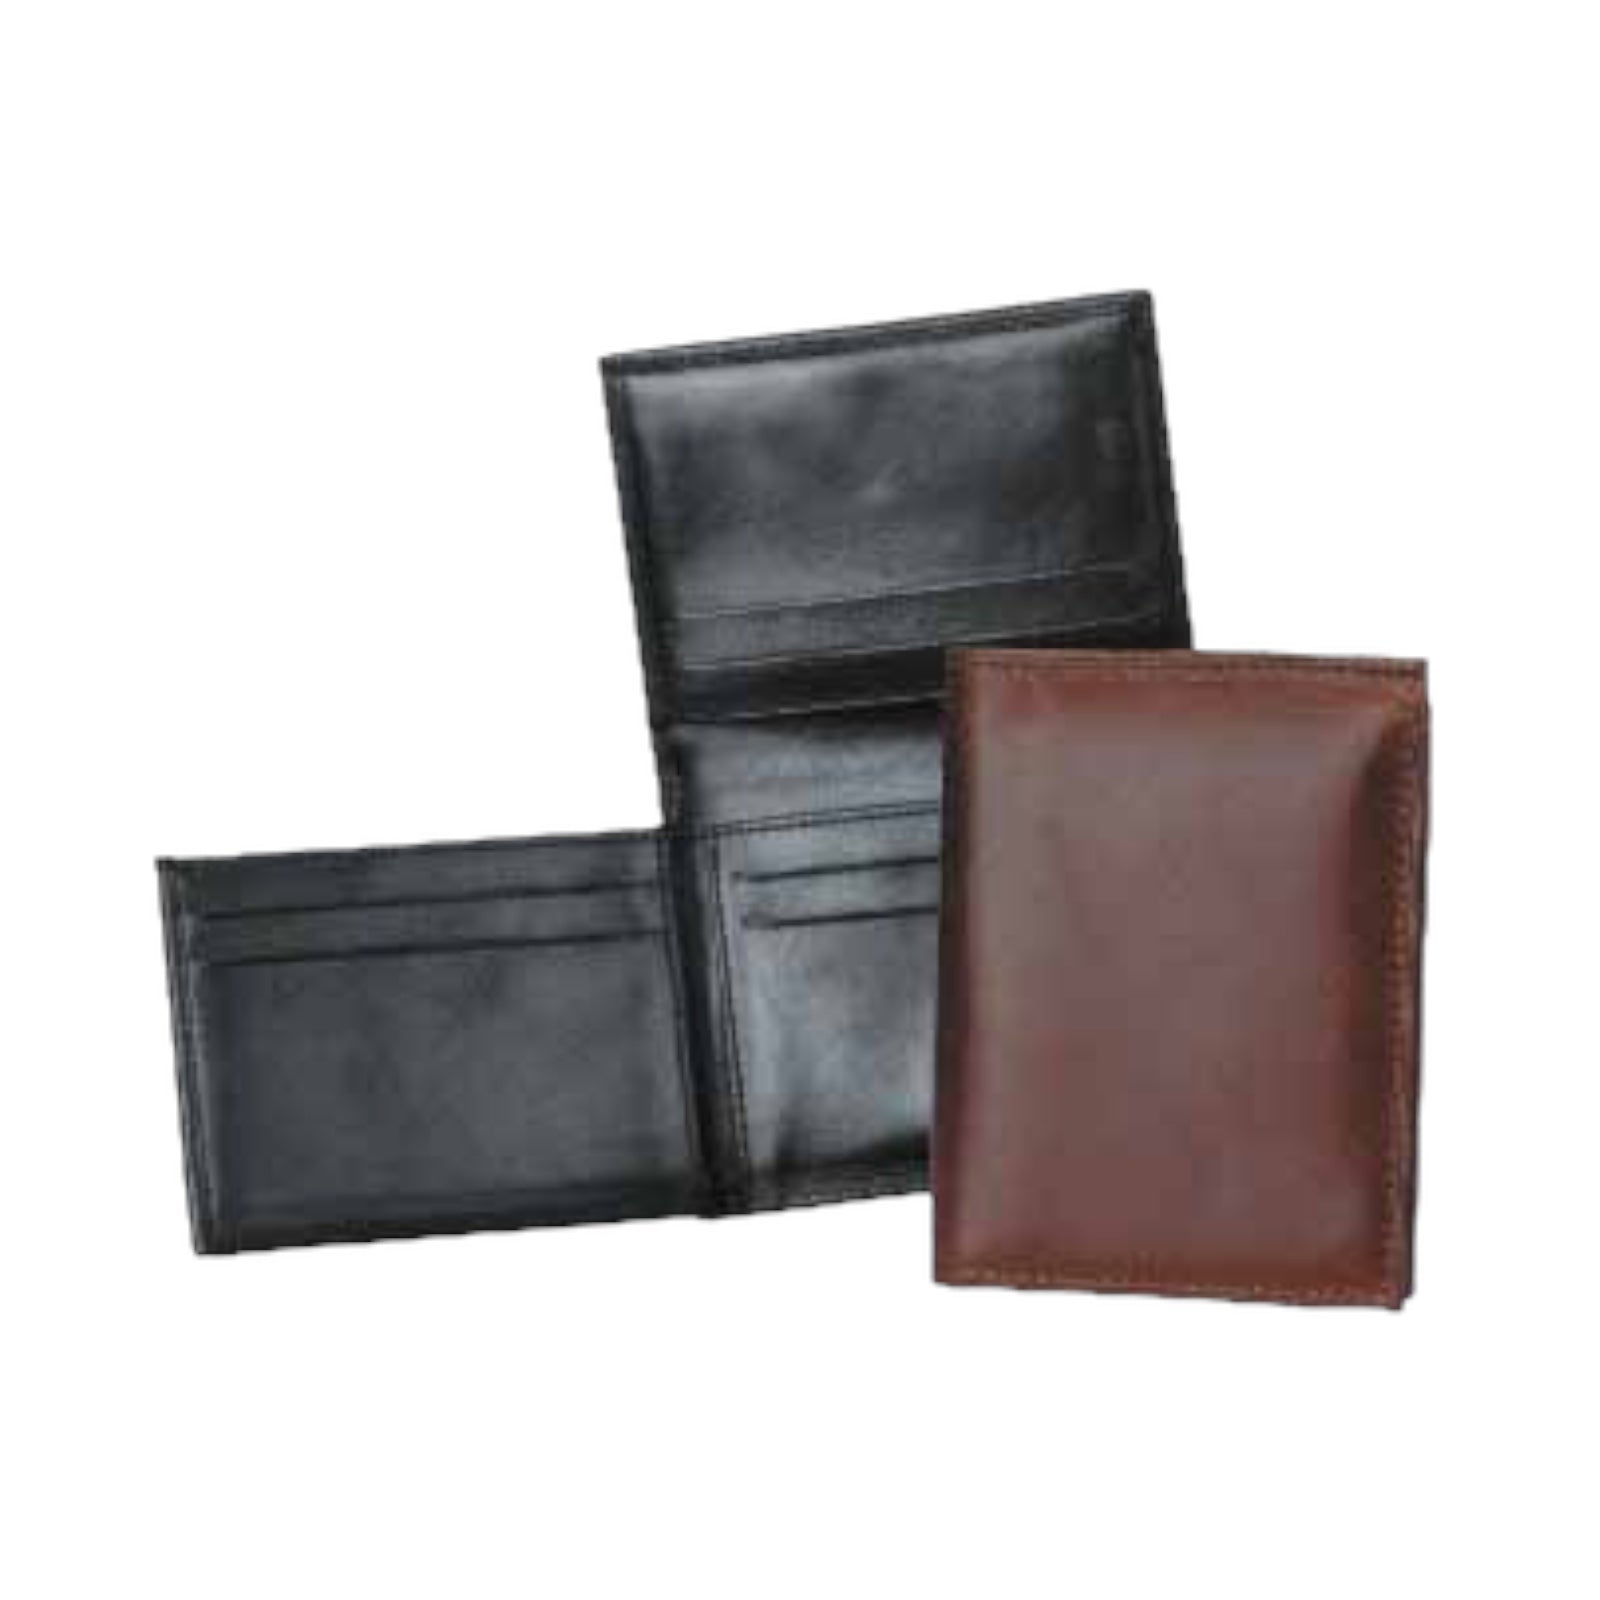 L Shaped Men's Wallet Leather Umberto Ferreti Made In Italy Organizer